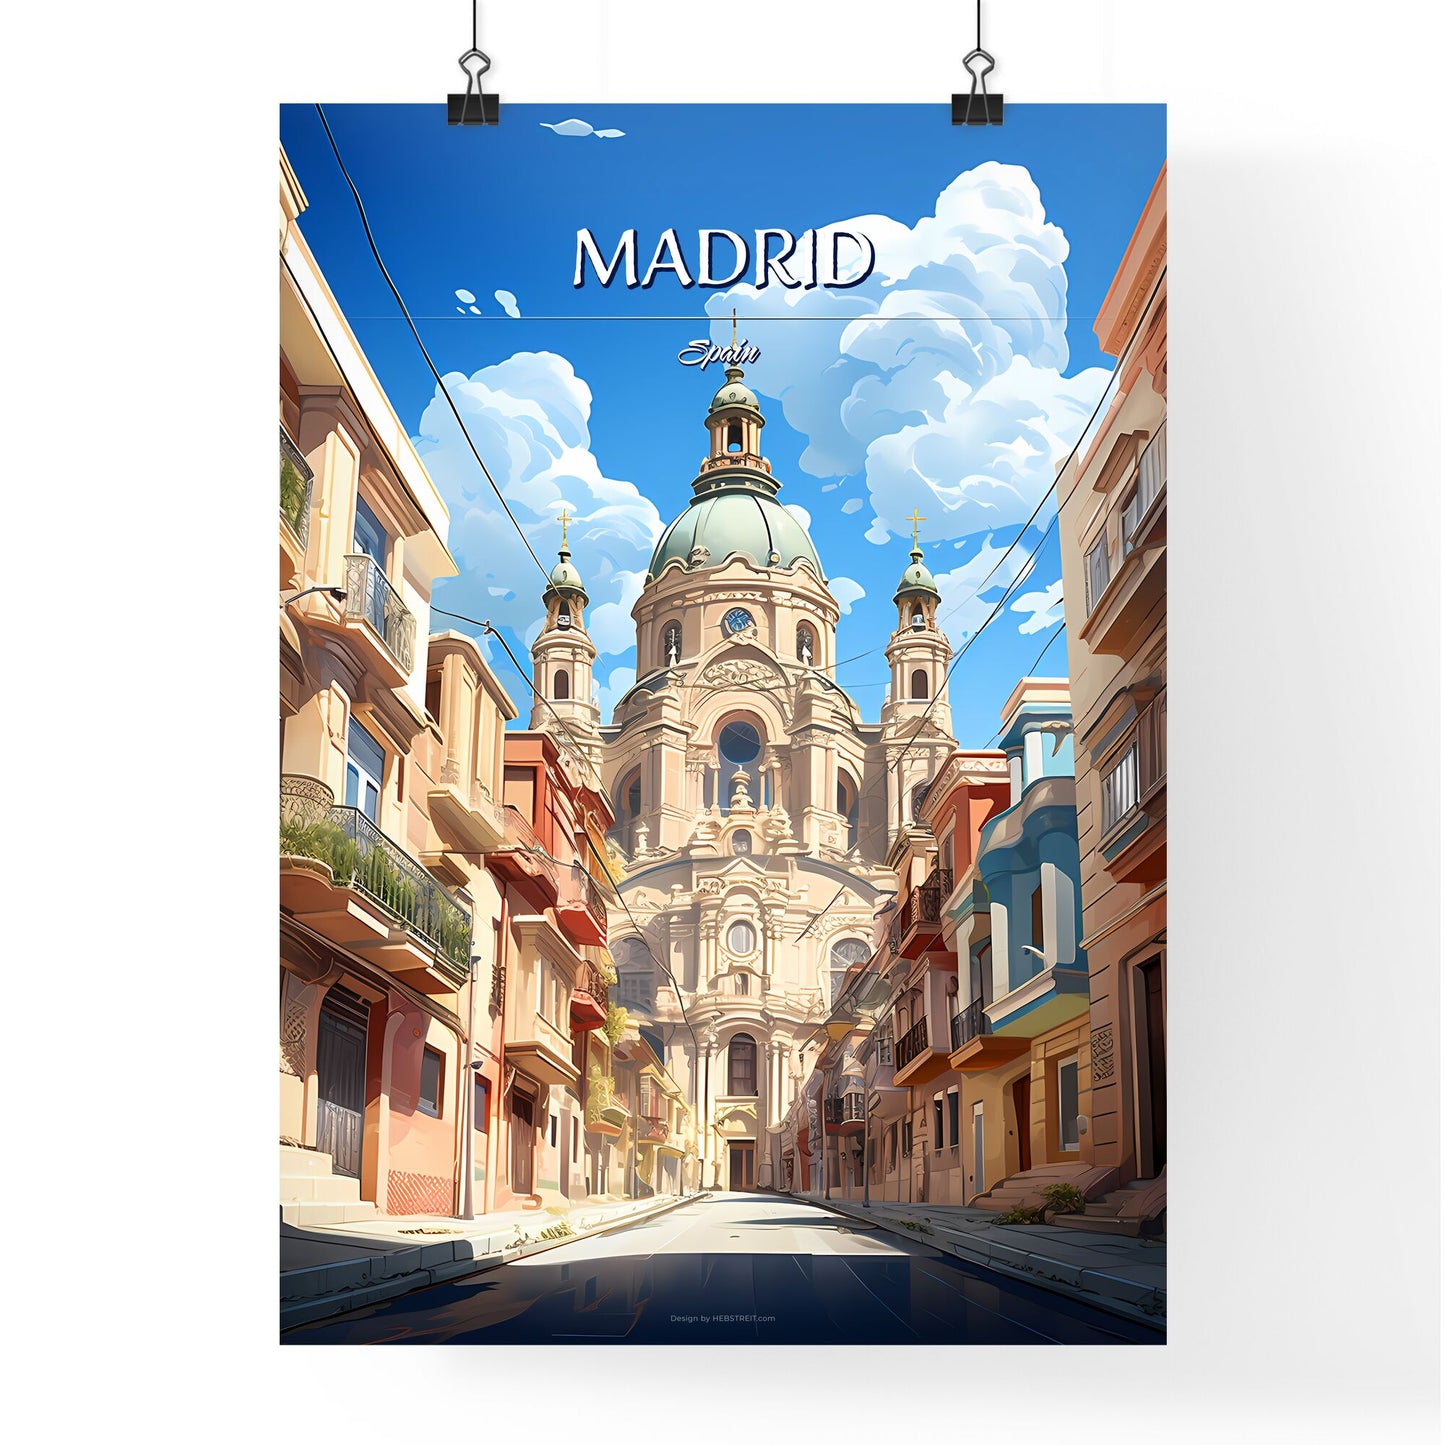 Madrid, Spain - Art print of a street with buildings and a large building Default Title